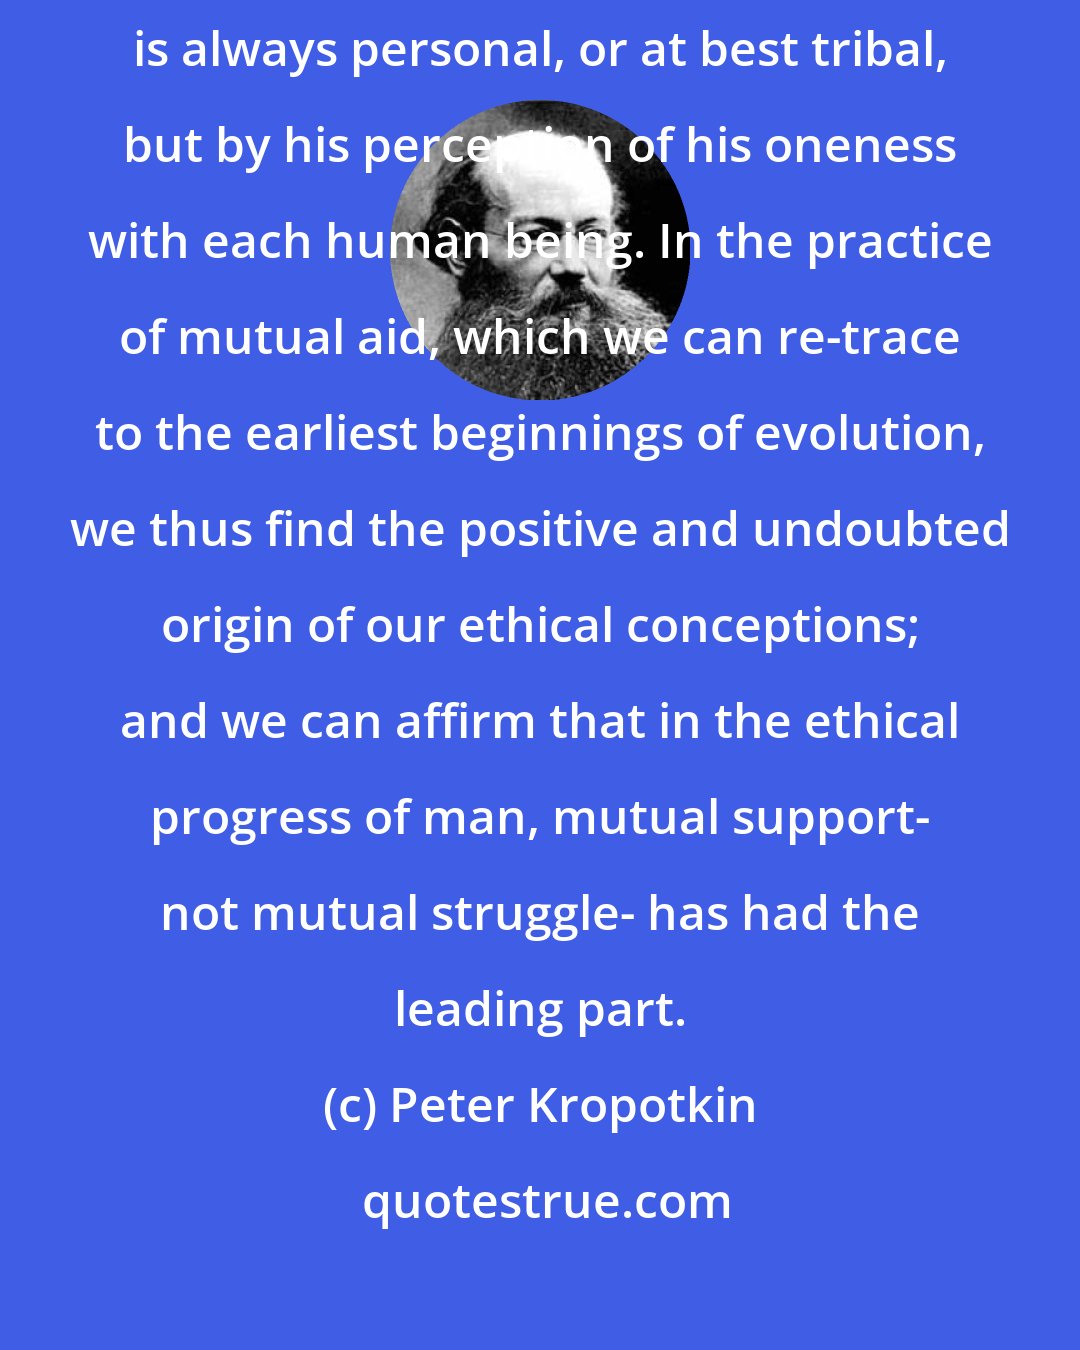 Peter Kropotkin: Man is appealed to be guided in his acts, not merely by love, which is always personal, or at best tribal, but by his perception of his oneness with each human being. In the practice of mutual aid, which we can re-trace to the earliest beginnings of evolution, we thus find the positive and undoubted origin of our ethical conceptions; and we can affirm that in the ethical progress of man, mutual support- not mutual struggle- has had the leading part.